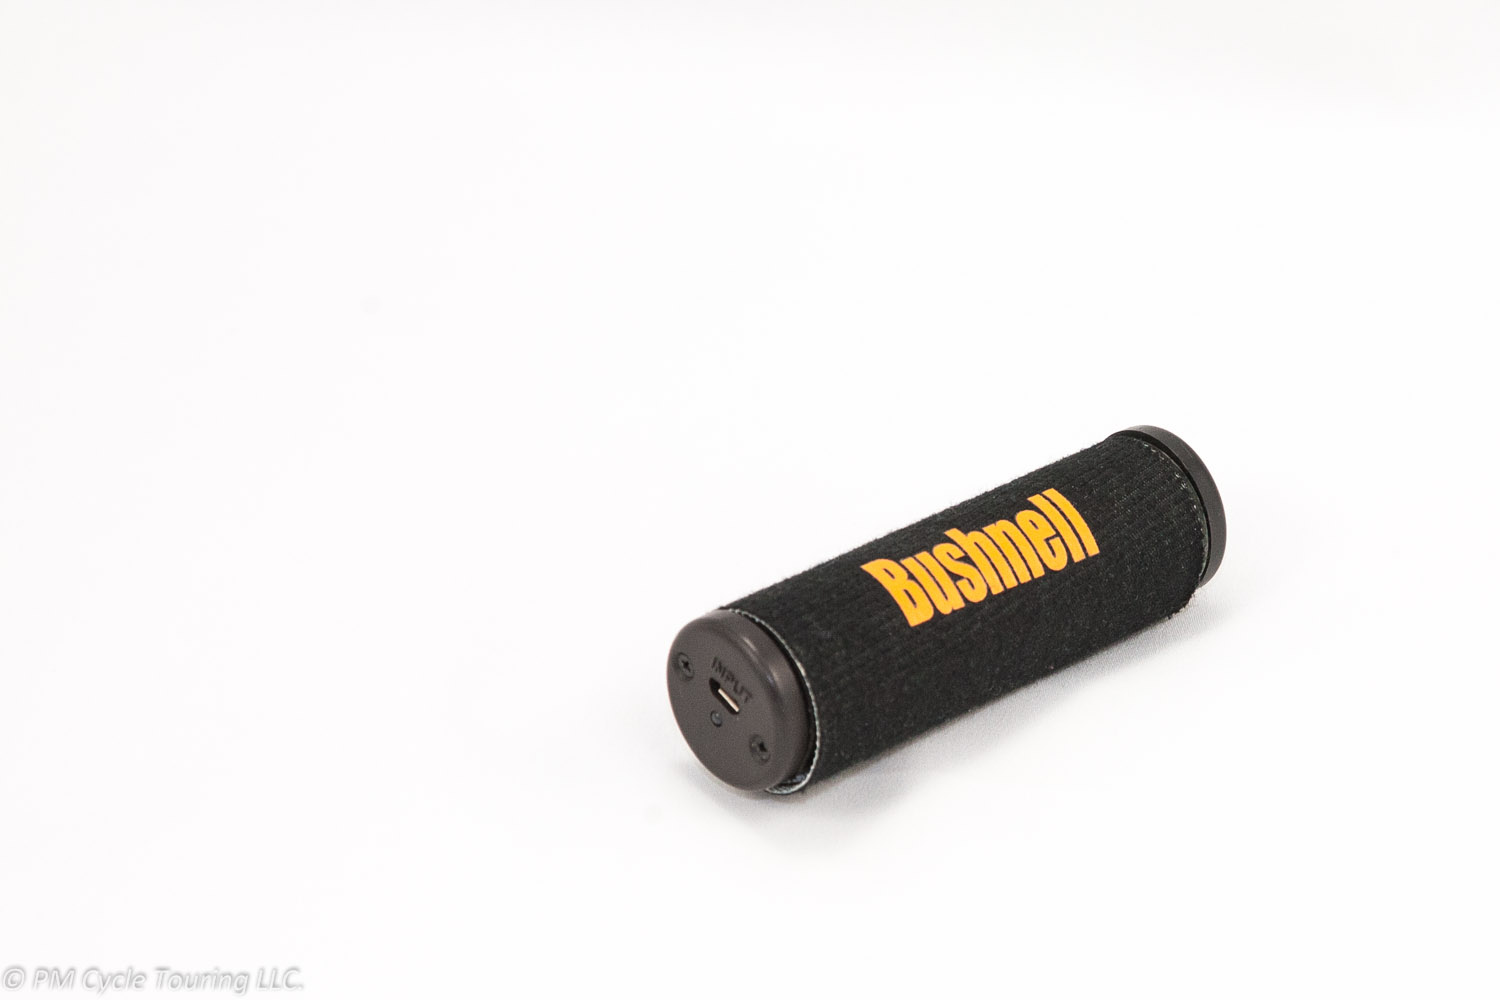 Solar Panels and Bicycle Touring: Bushnell Mini Wrap Review